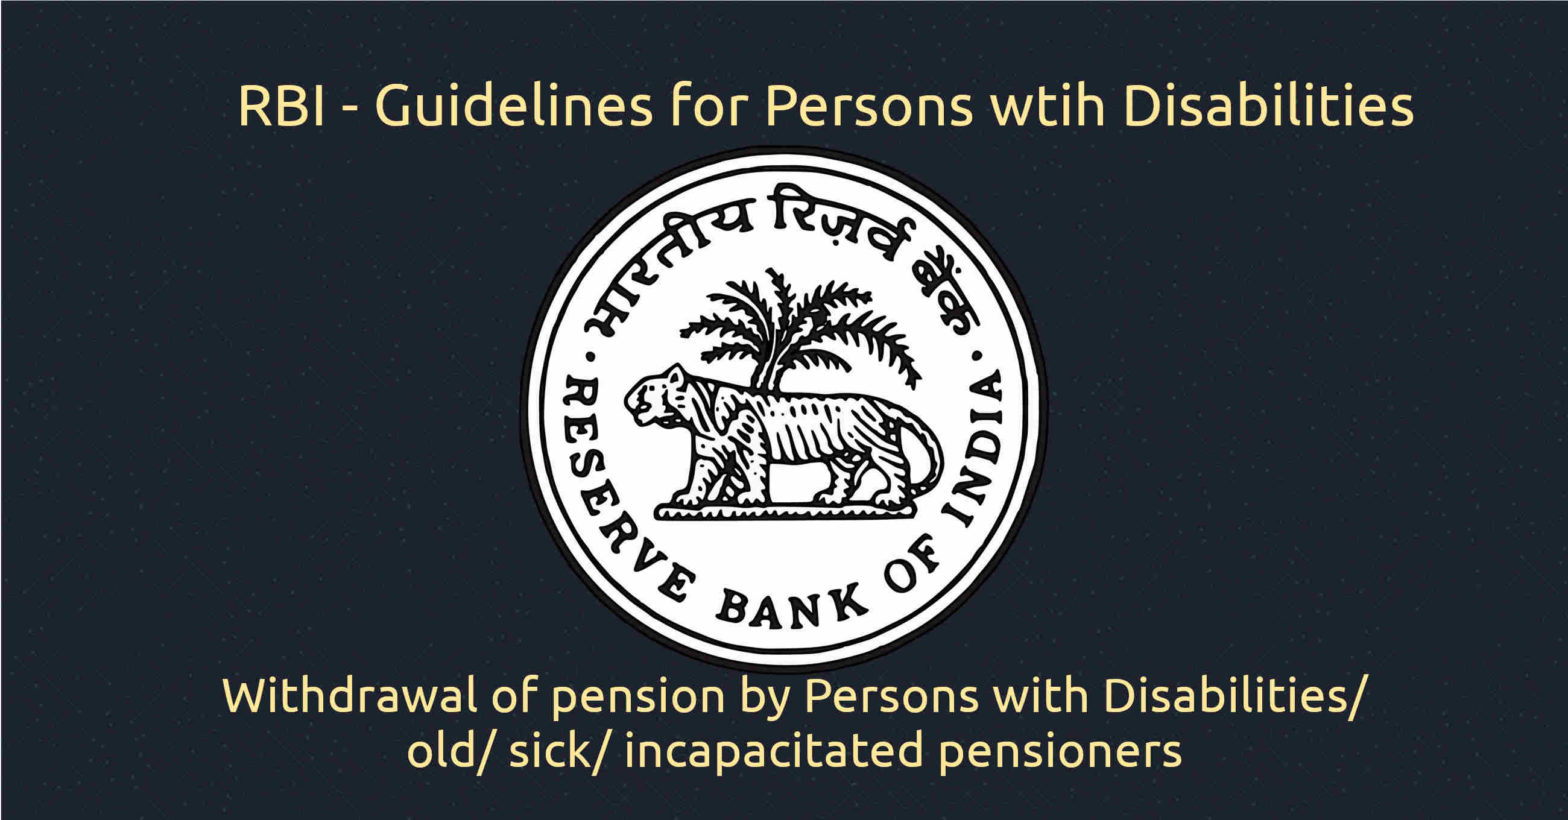 Withdrawal of pension by Persons with Disabilities/ old/ sick/ incapacitated pensioners